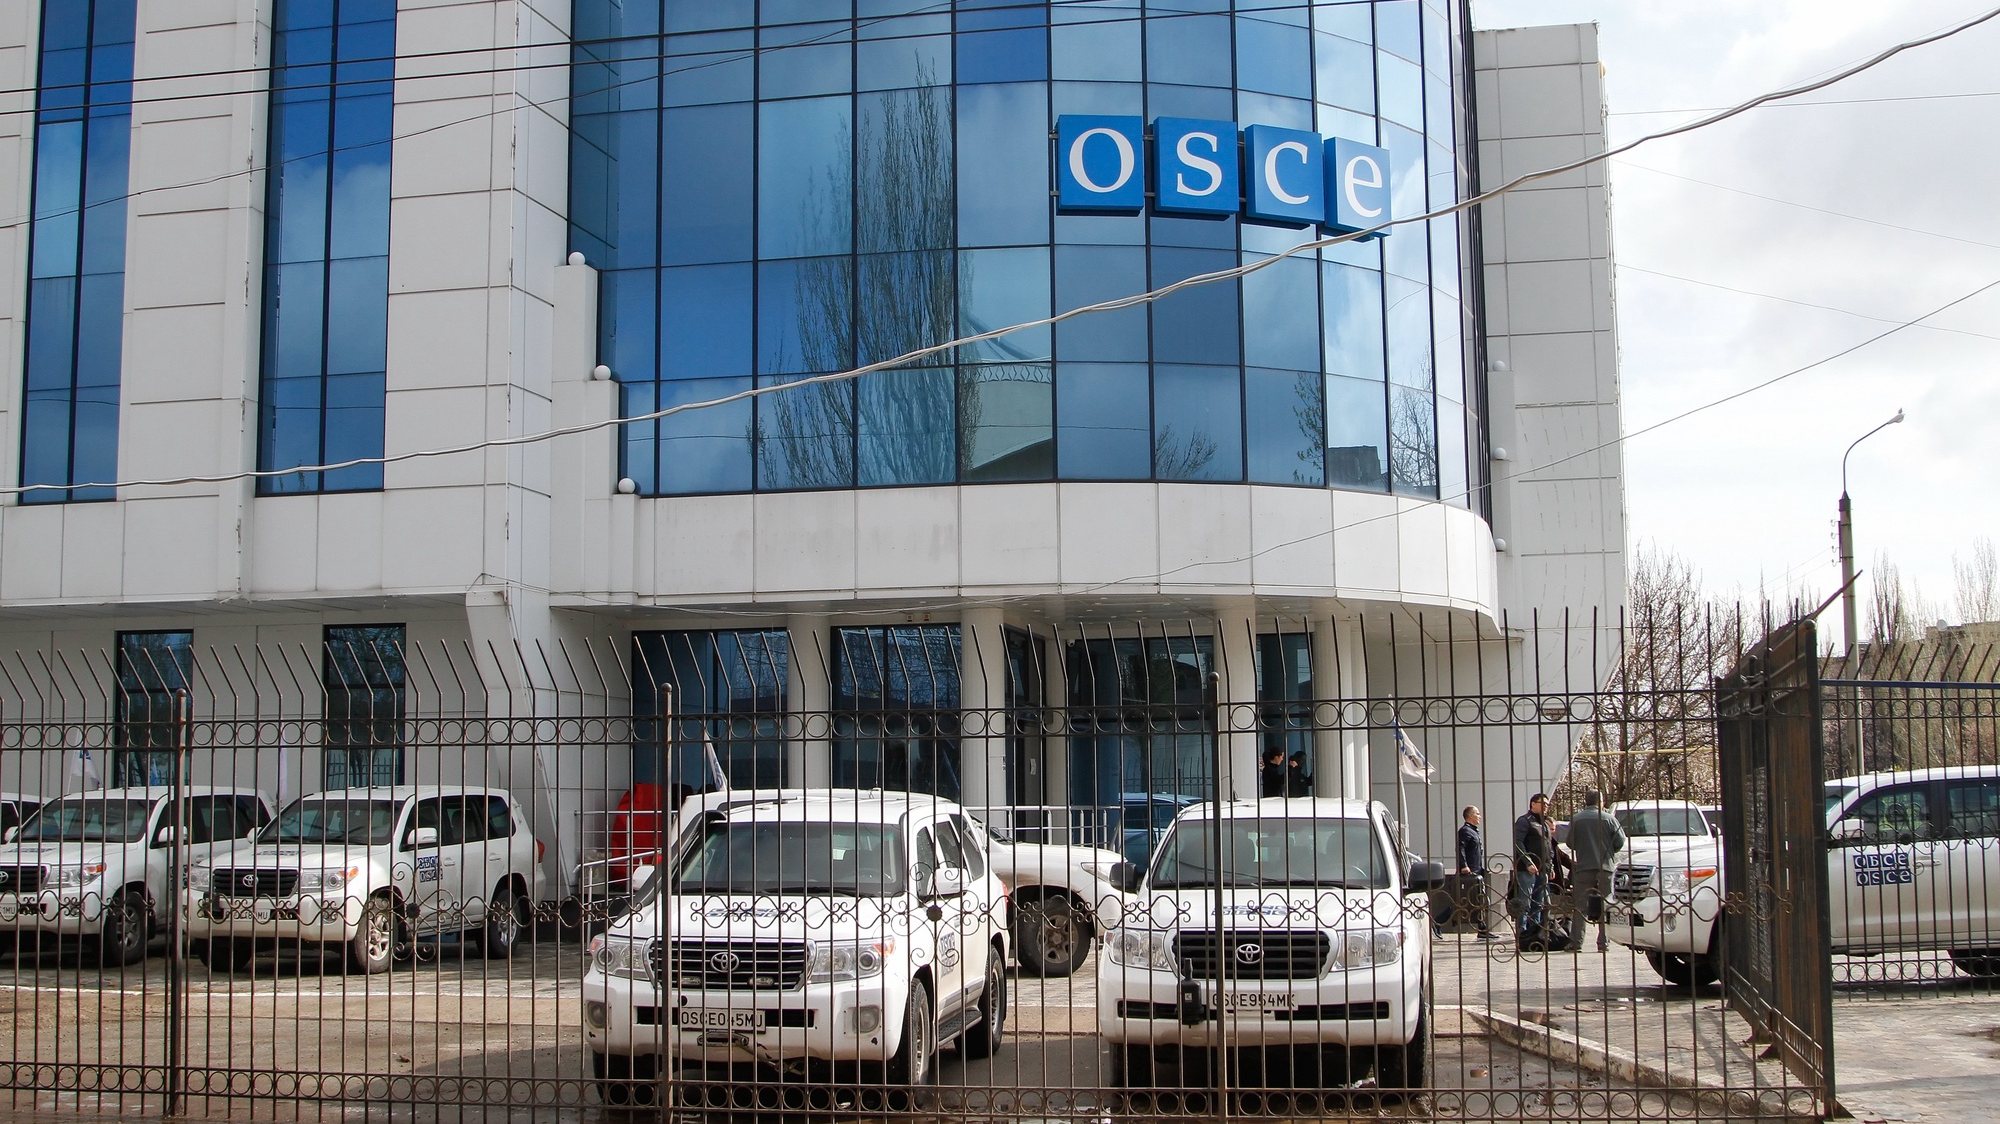 epa05925032 OSCE cars parked near of the Organization for Security and Co-operation in Europe (OSCE) Special Monitoring Mission office on the pro-Russian rebels controlled territory in Luhansk, Ukraine, 24 April 2017. One US man was killed and two observers from Germany and Czech Republic were injured in result explosion of OSCE car on an anti-tank mine near the small village of Pryshyb, Luhansk area, which is controlled by pro-Russian rebels as Alexander Hug, Deputy Chief Monitor of the Organization for Security and Co-operation in Europe (OSCE) Special Monitoring Mission to Ukraine, told during his press conference in Kiev, 23 April 2017.  EPA/ALEXANDER ERMOCHENKO